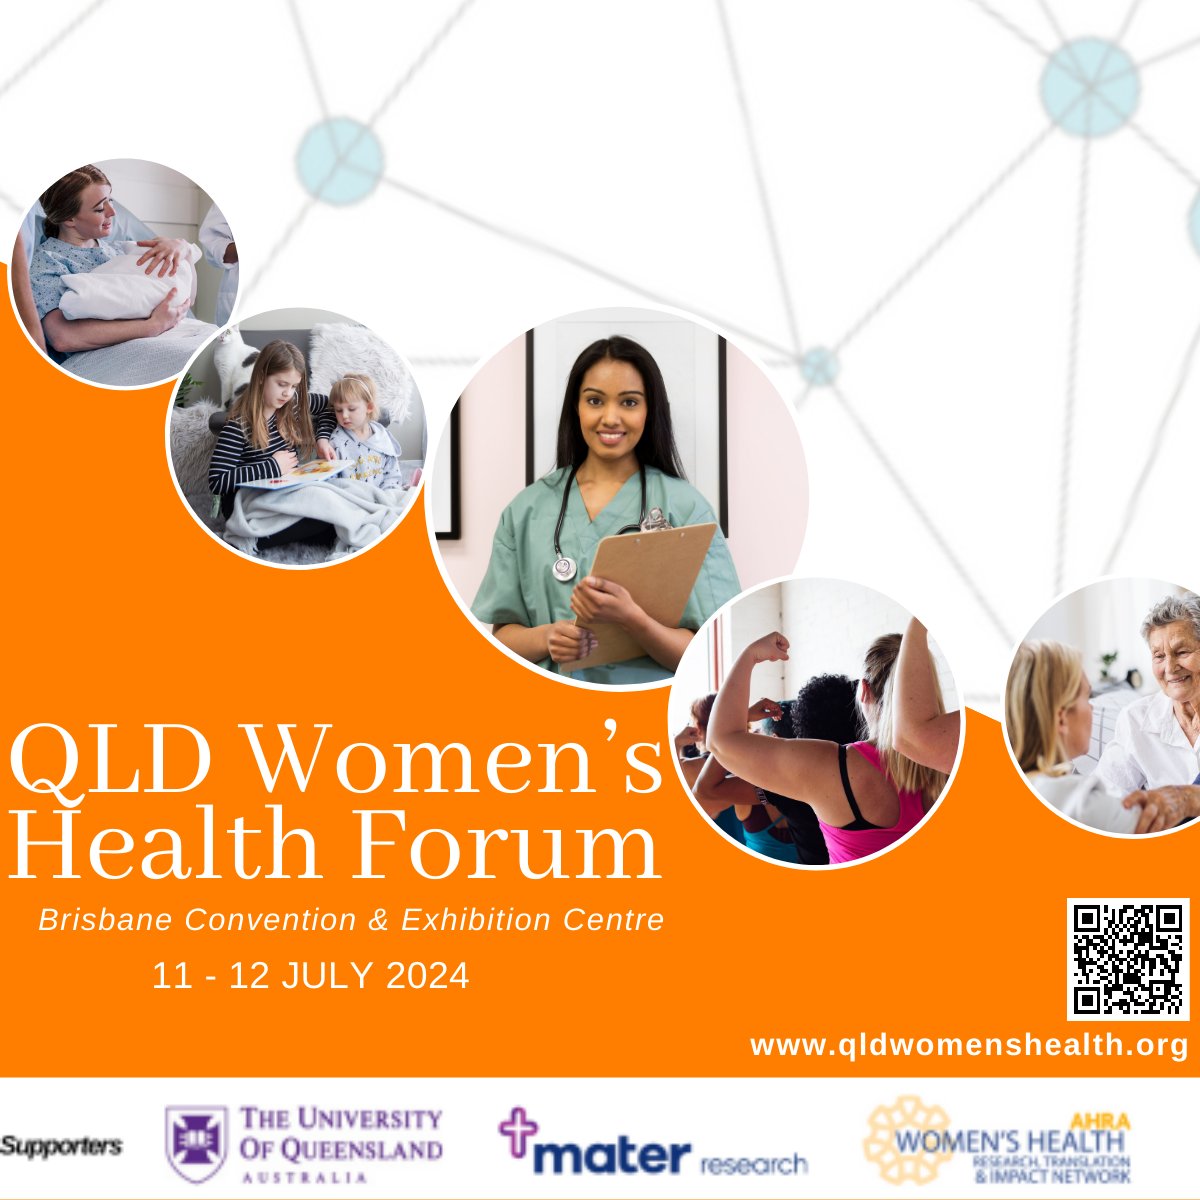 Register to attend the QLD Women's Health Forum to improve women's health research in QLD. An opportunity in July for clinician researchers, academics, EMCRs, consumers, non-profit organisations & Government Departments to share expertise & network. More: qldwomenshealth.org